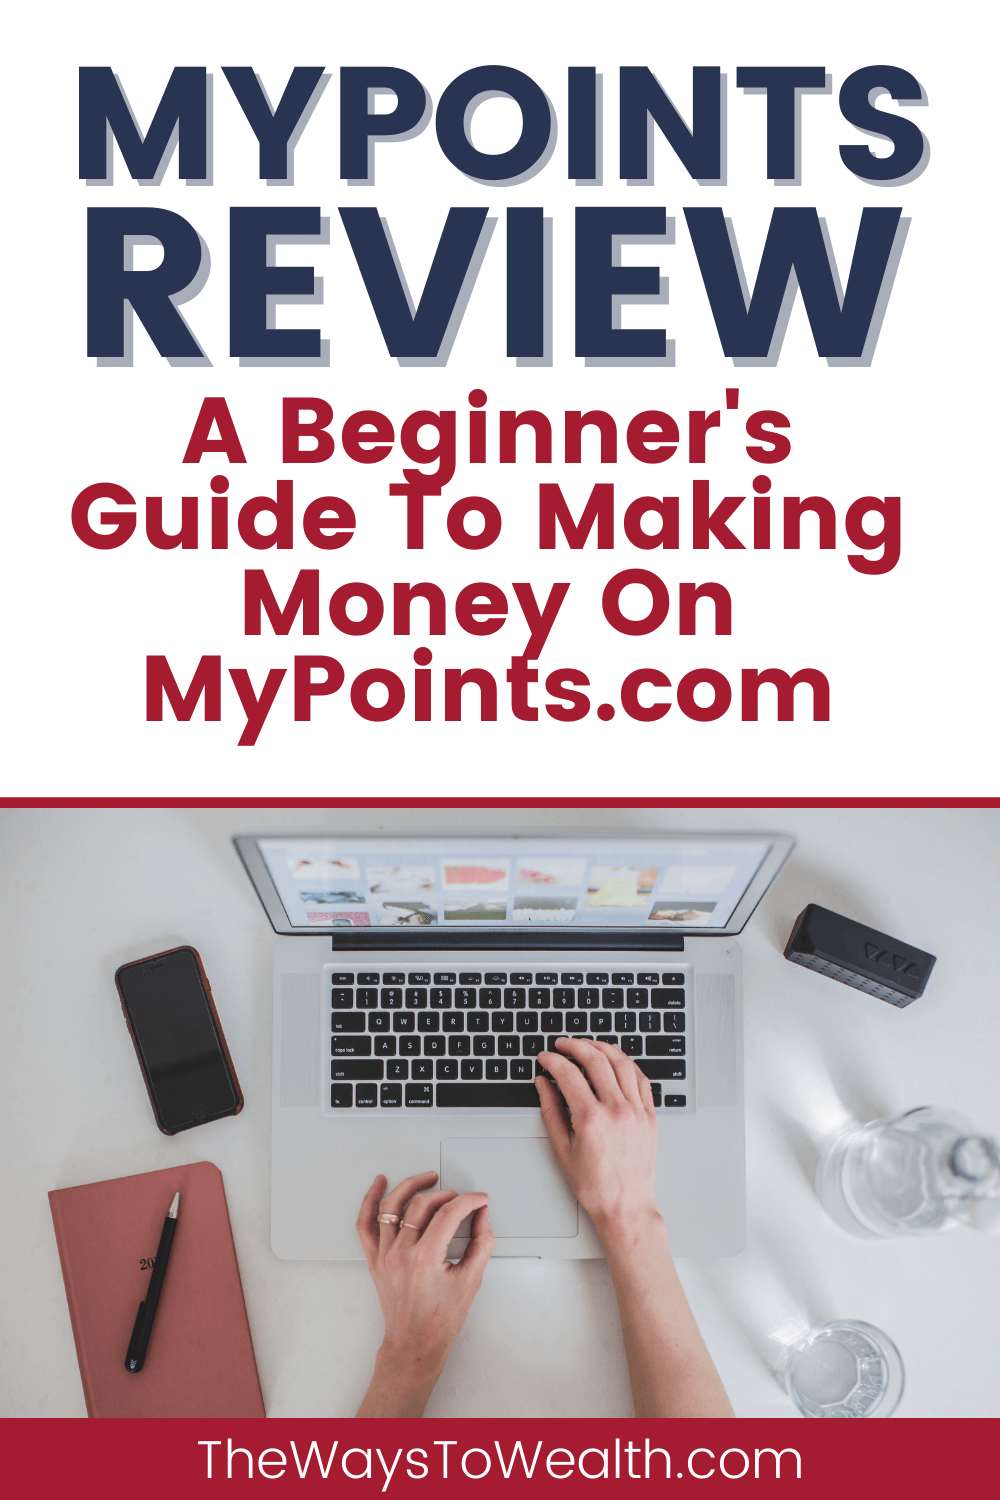 MyPoints Review Earn With CashBack Shopping, Surveys and More